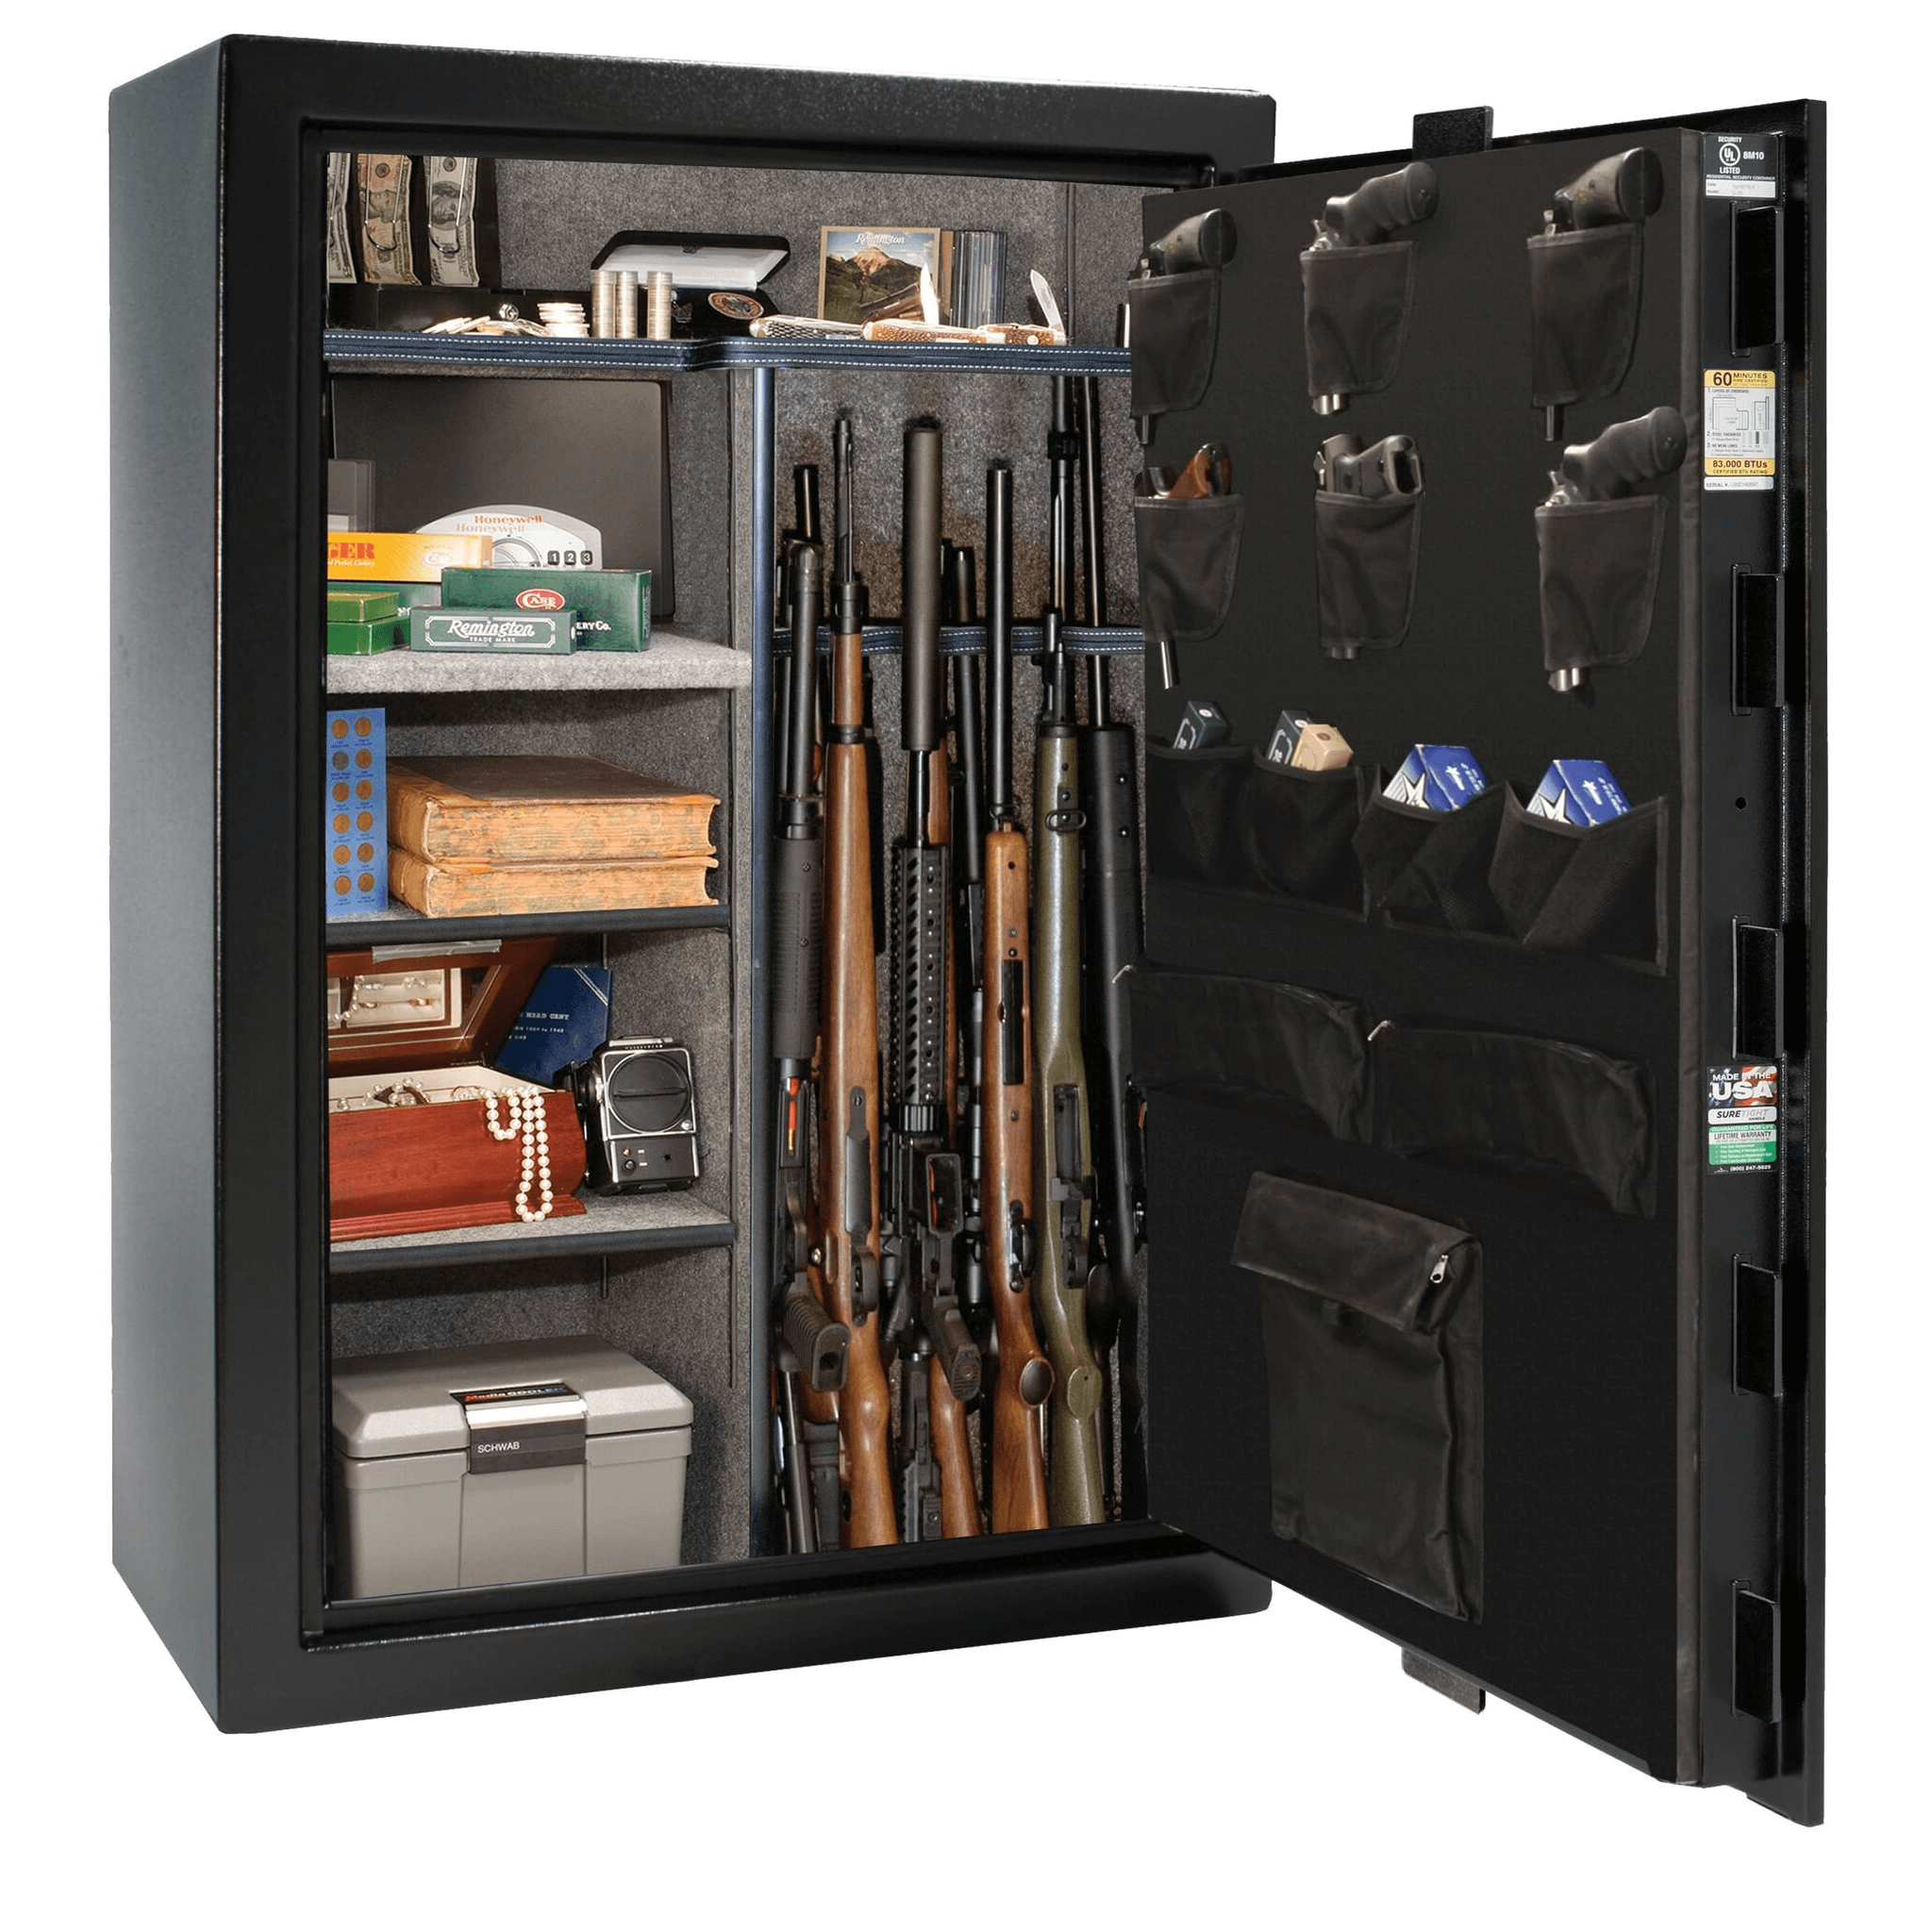 Fatboy Jr. Series | Level 3 Security | 75 Minute Fire Protection | 48 | Dimensions: 60.5"(H) x 42"(W) x 25"(D) | Black Textured | Mechanical Lock